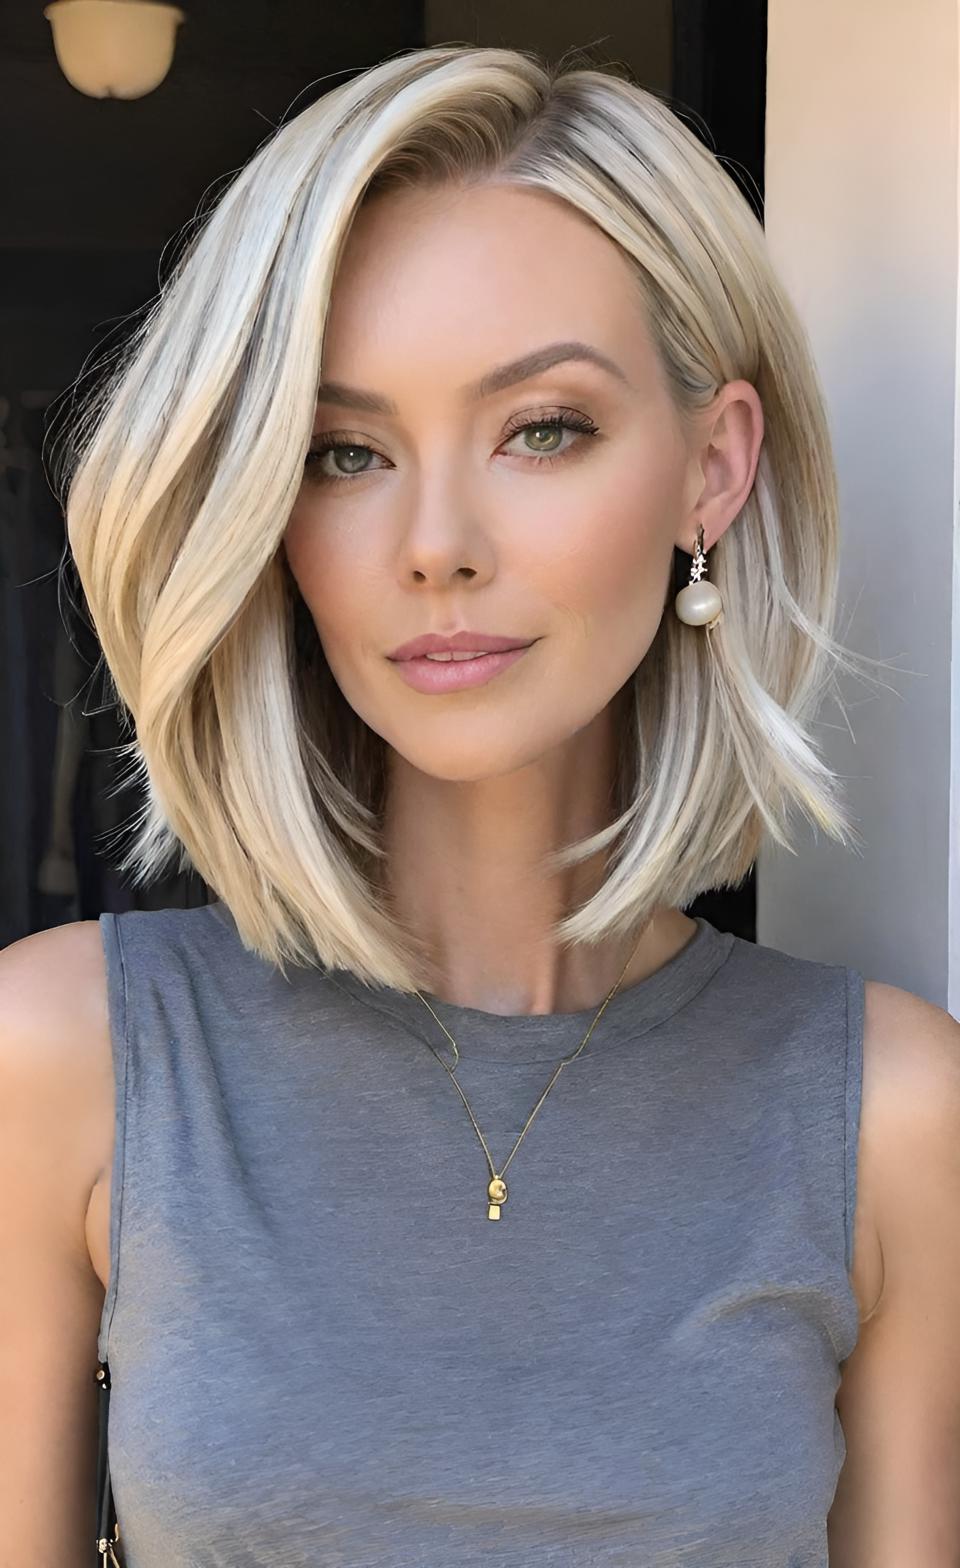 Chin Length Haircuts: Chic Styles for a Trendy Look In